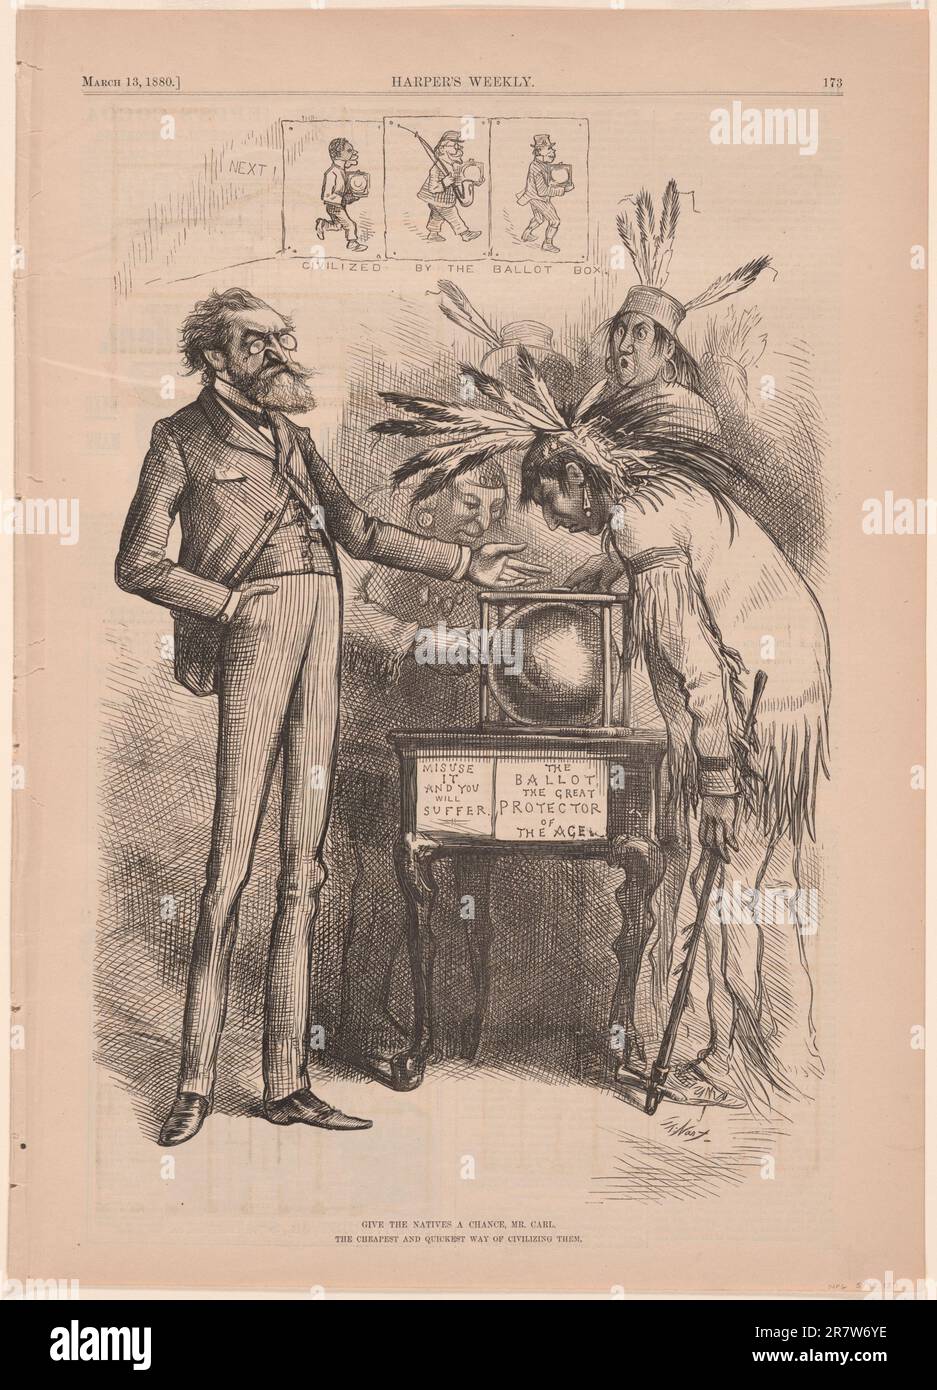 Give the Natives a Chance, Carl March 13, 1880 Stock Photo